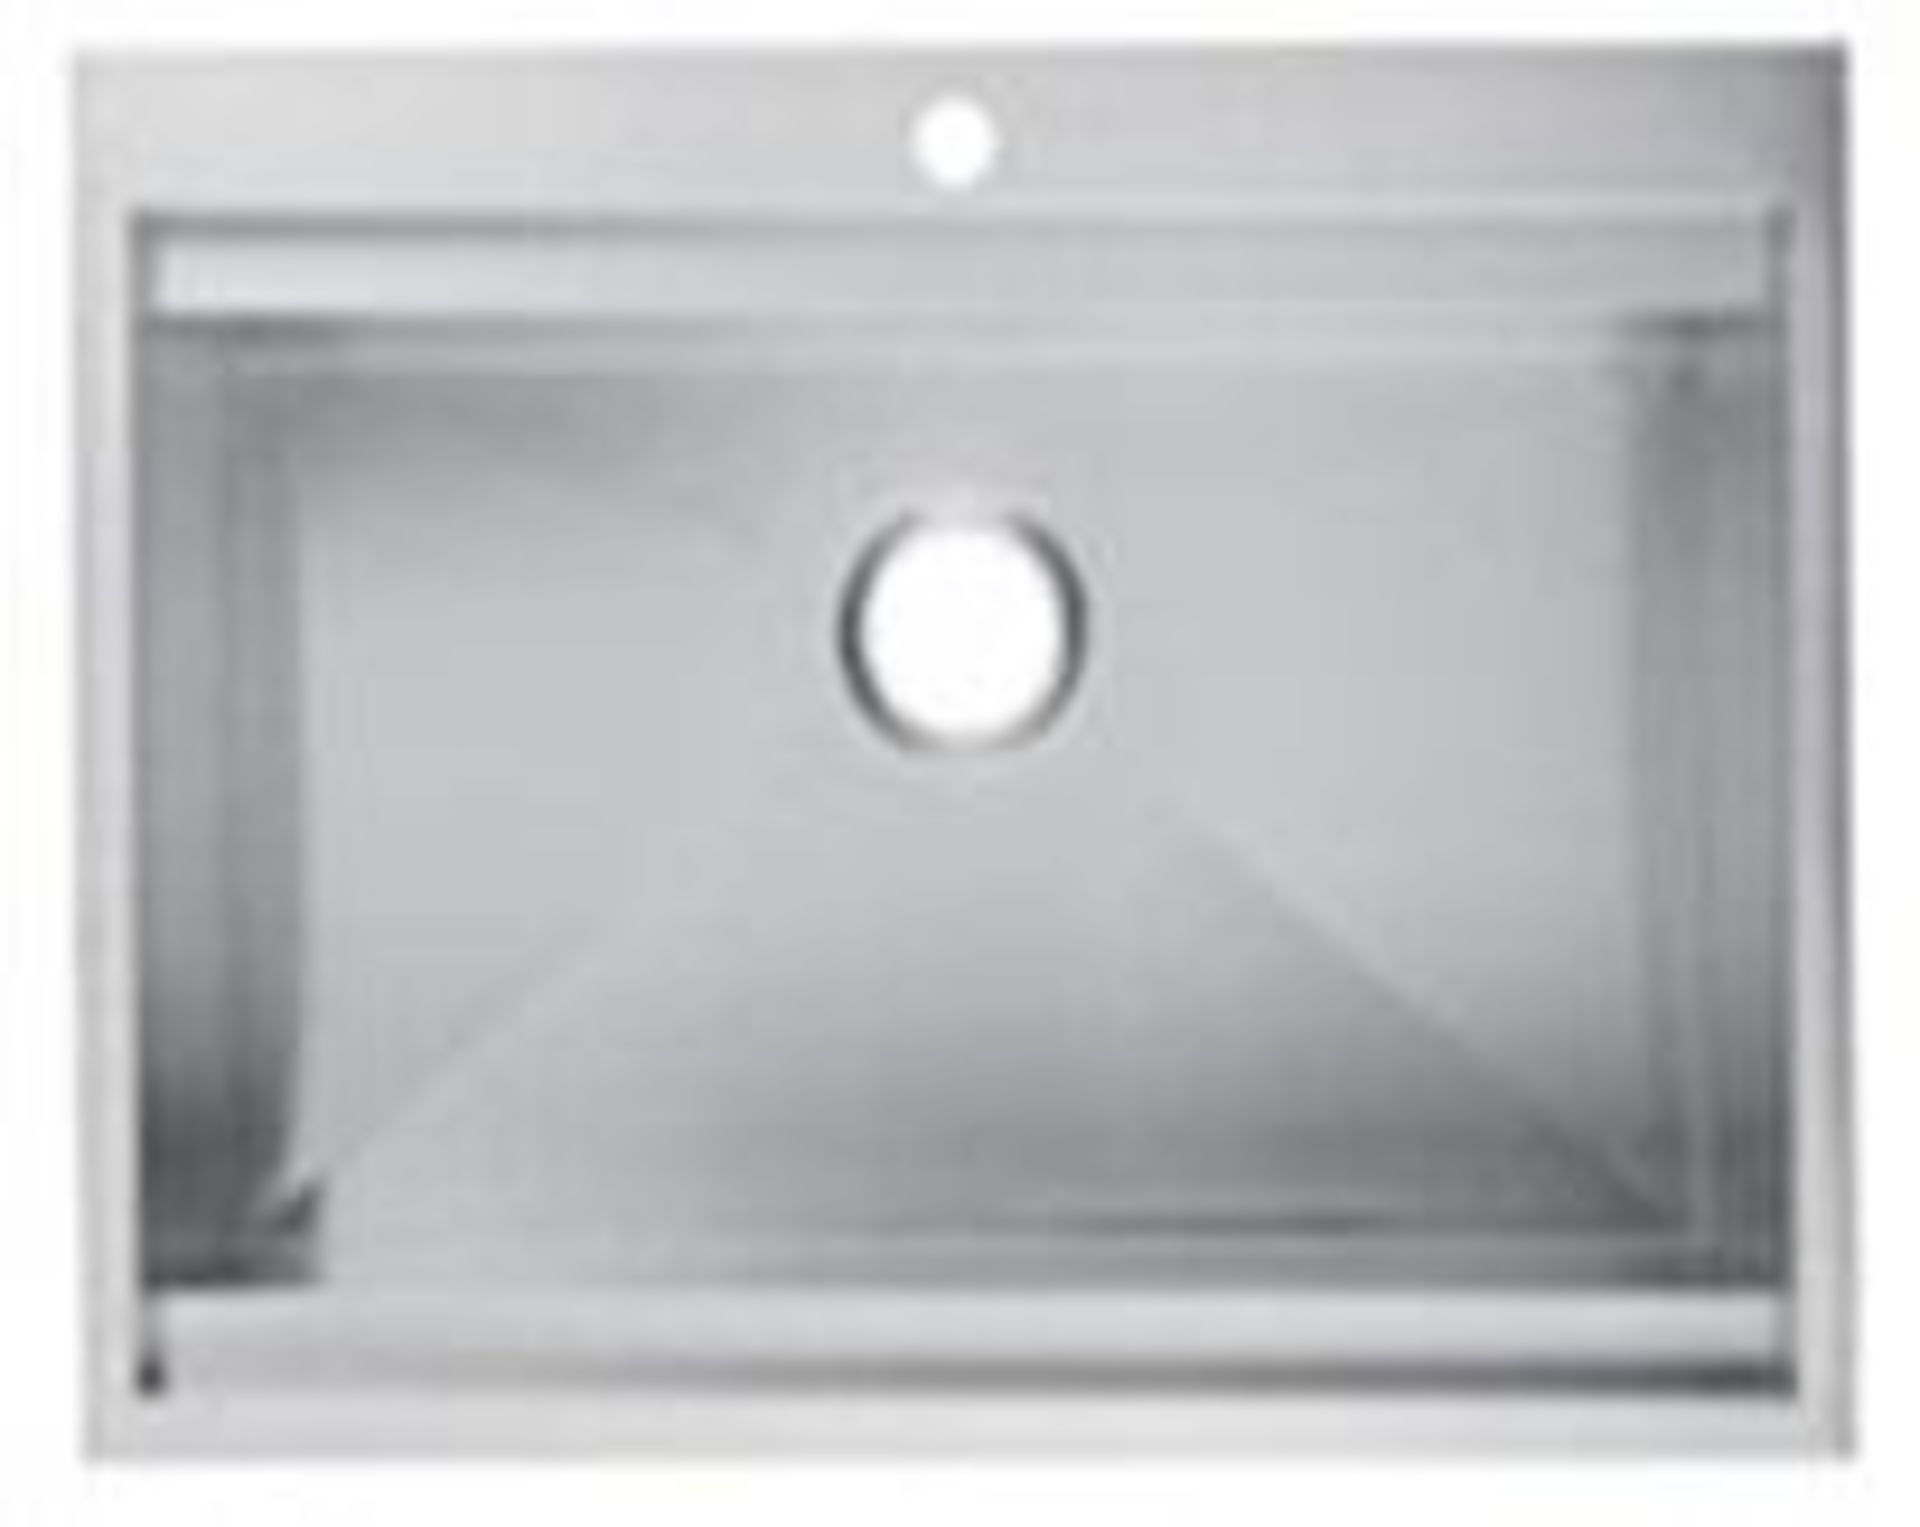 1 x Luxury Man-Made Stainless Steel Undermount Kitchen Sink - Dimensions To Follow - Brand New & Box